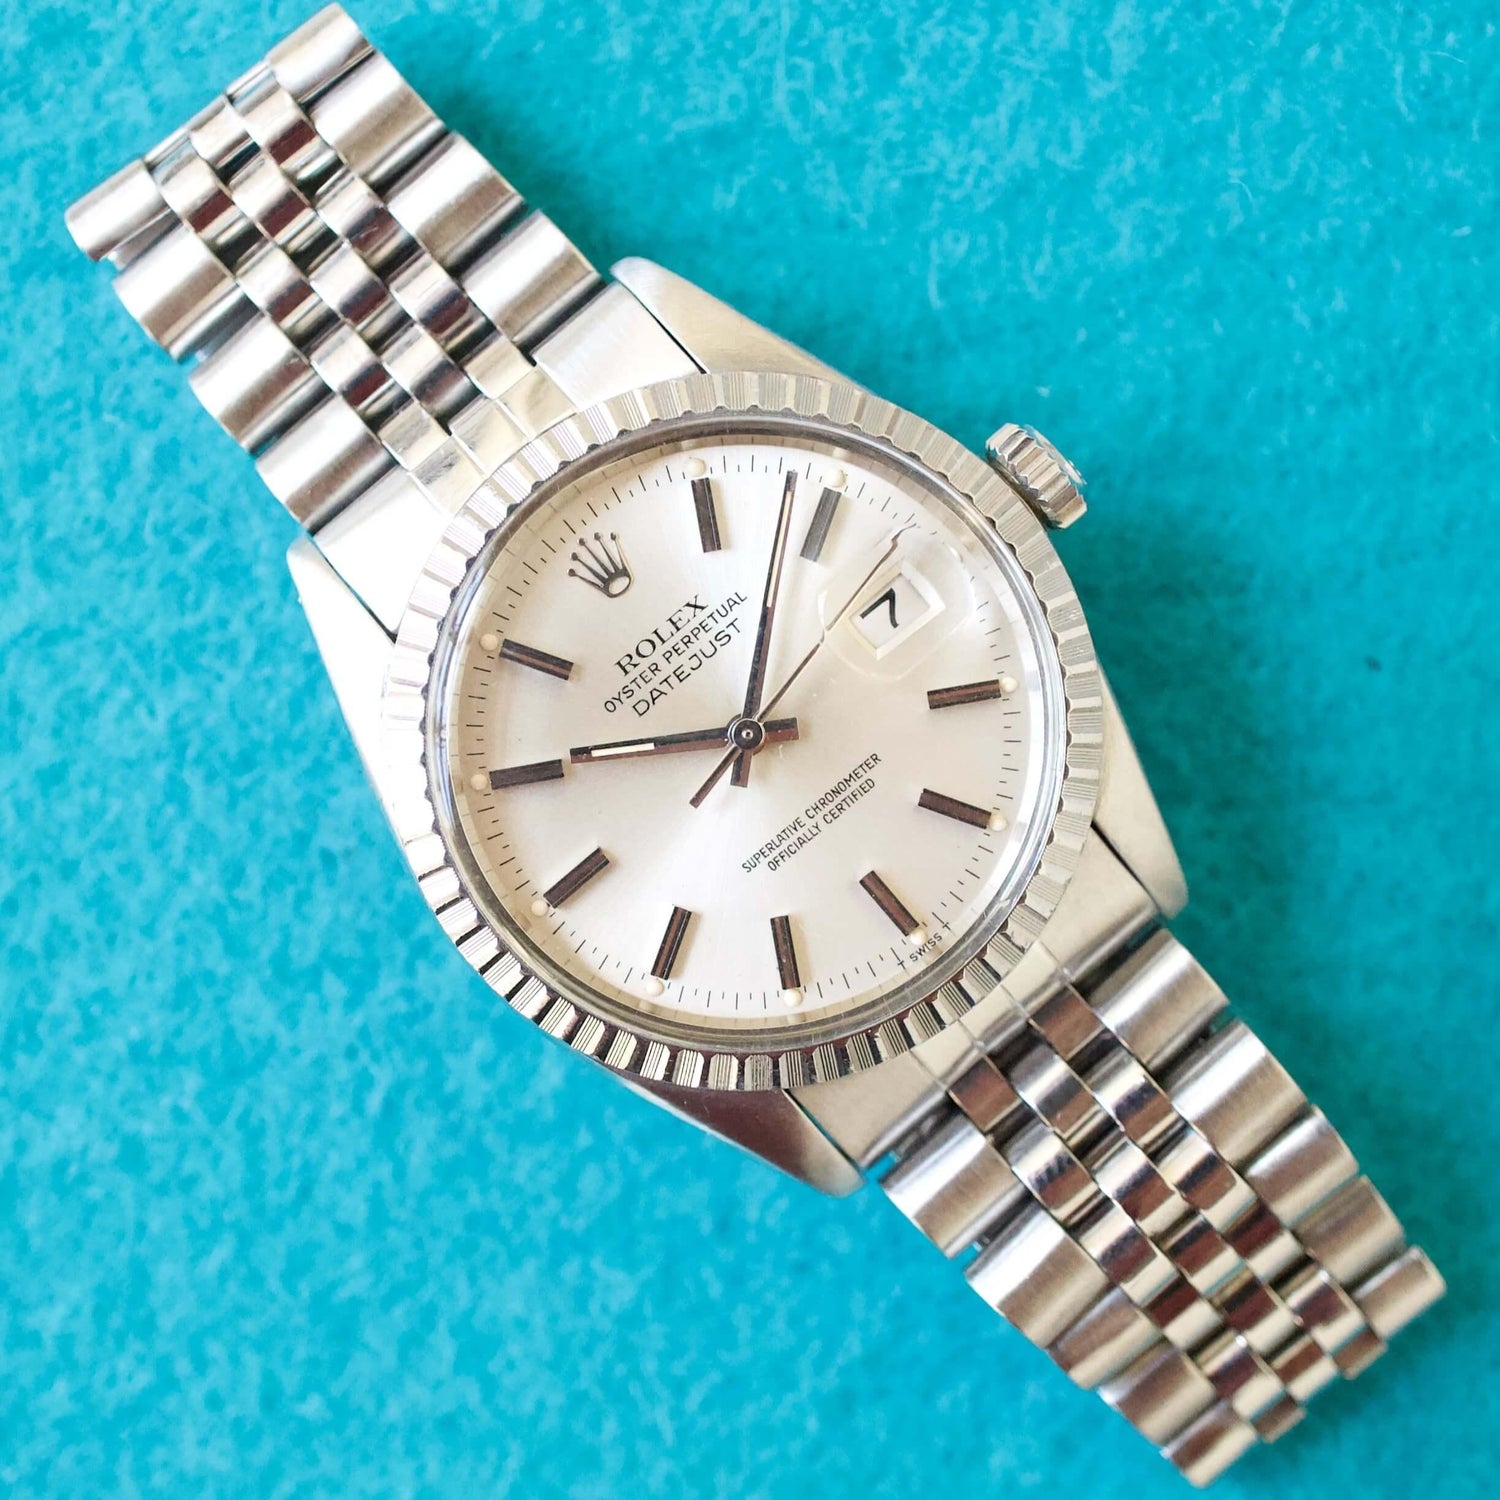 SOLDOUT: Rolex Datejust 36MM 16030 Jubilee Engine Turned Bezel 1980 1 Year Warranty Box And Papers - WearingTime Luxury Watches